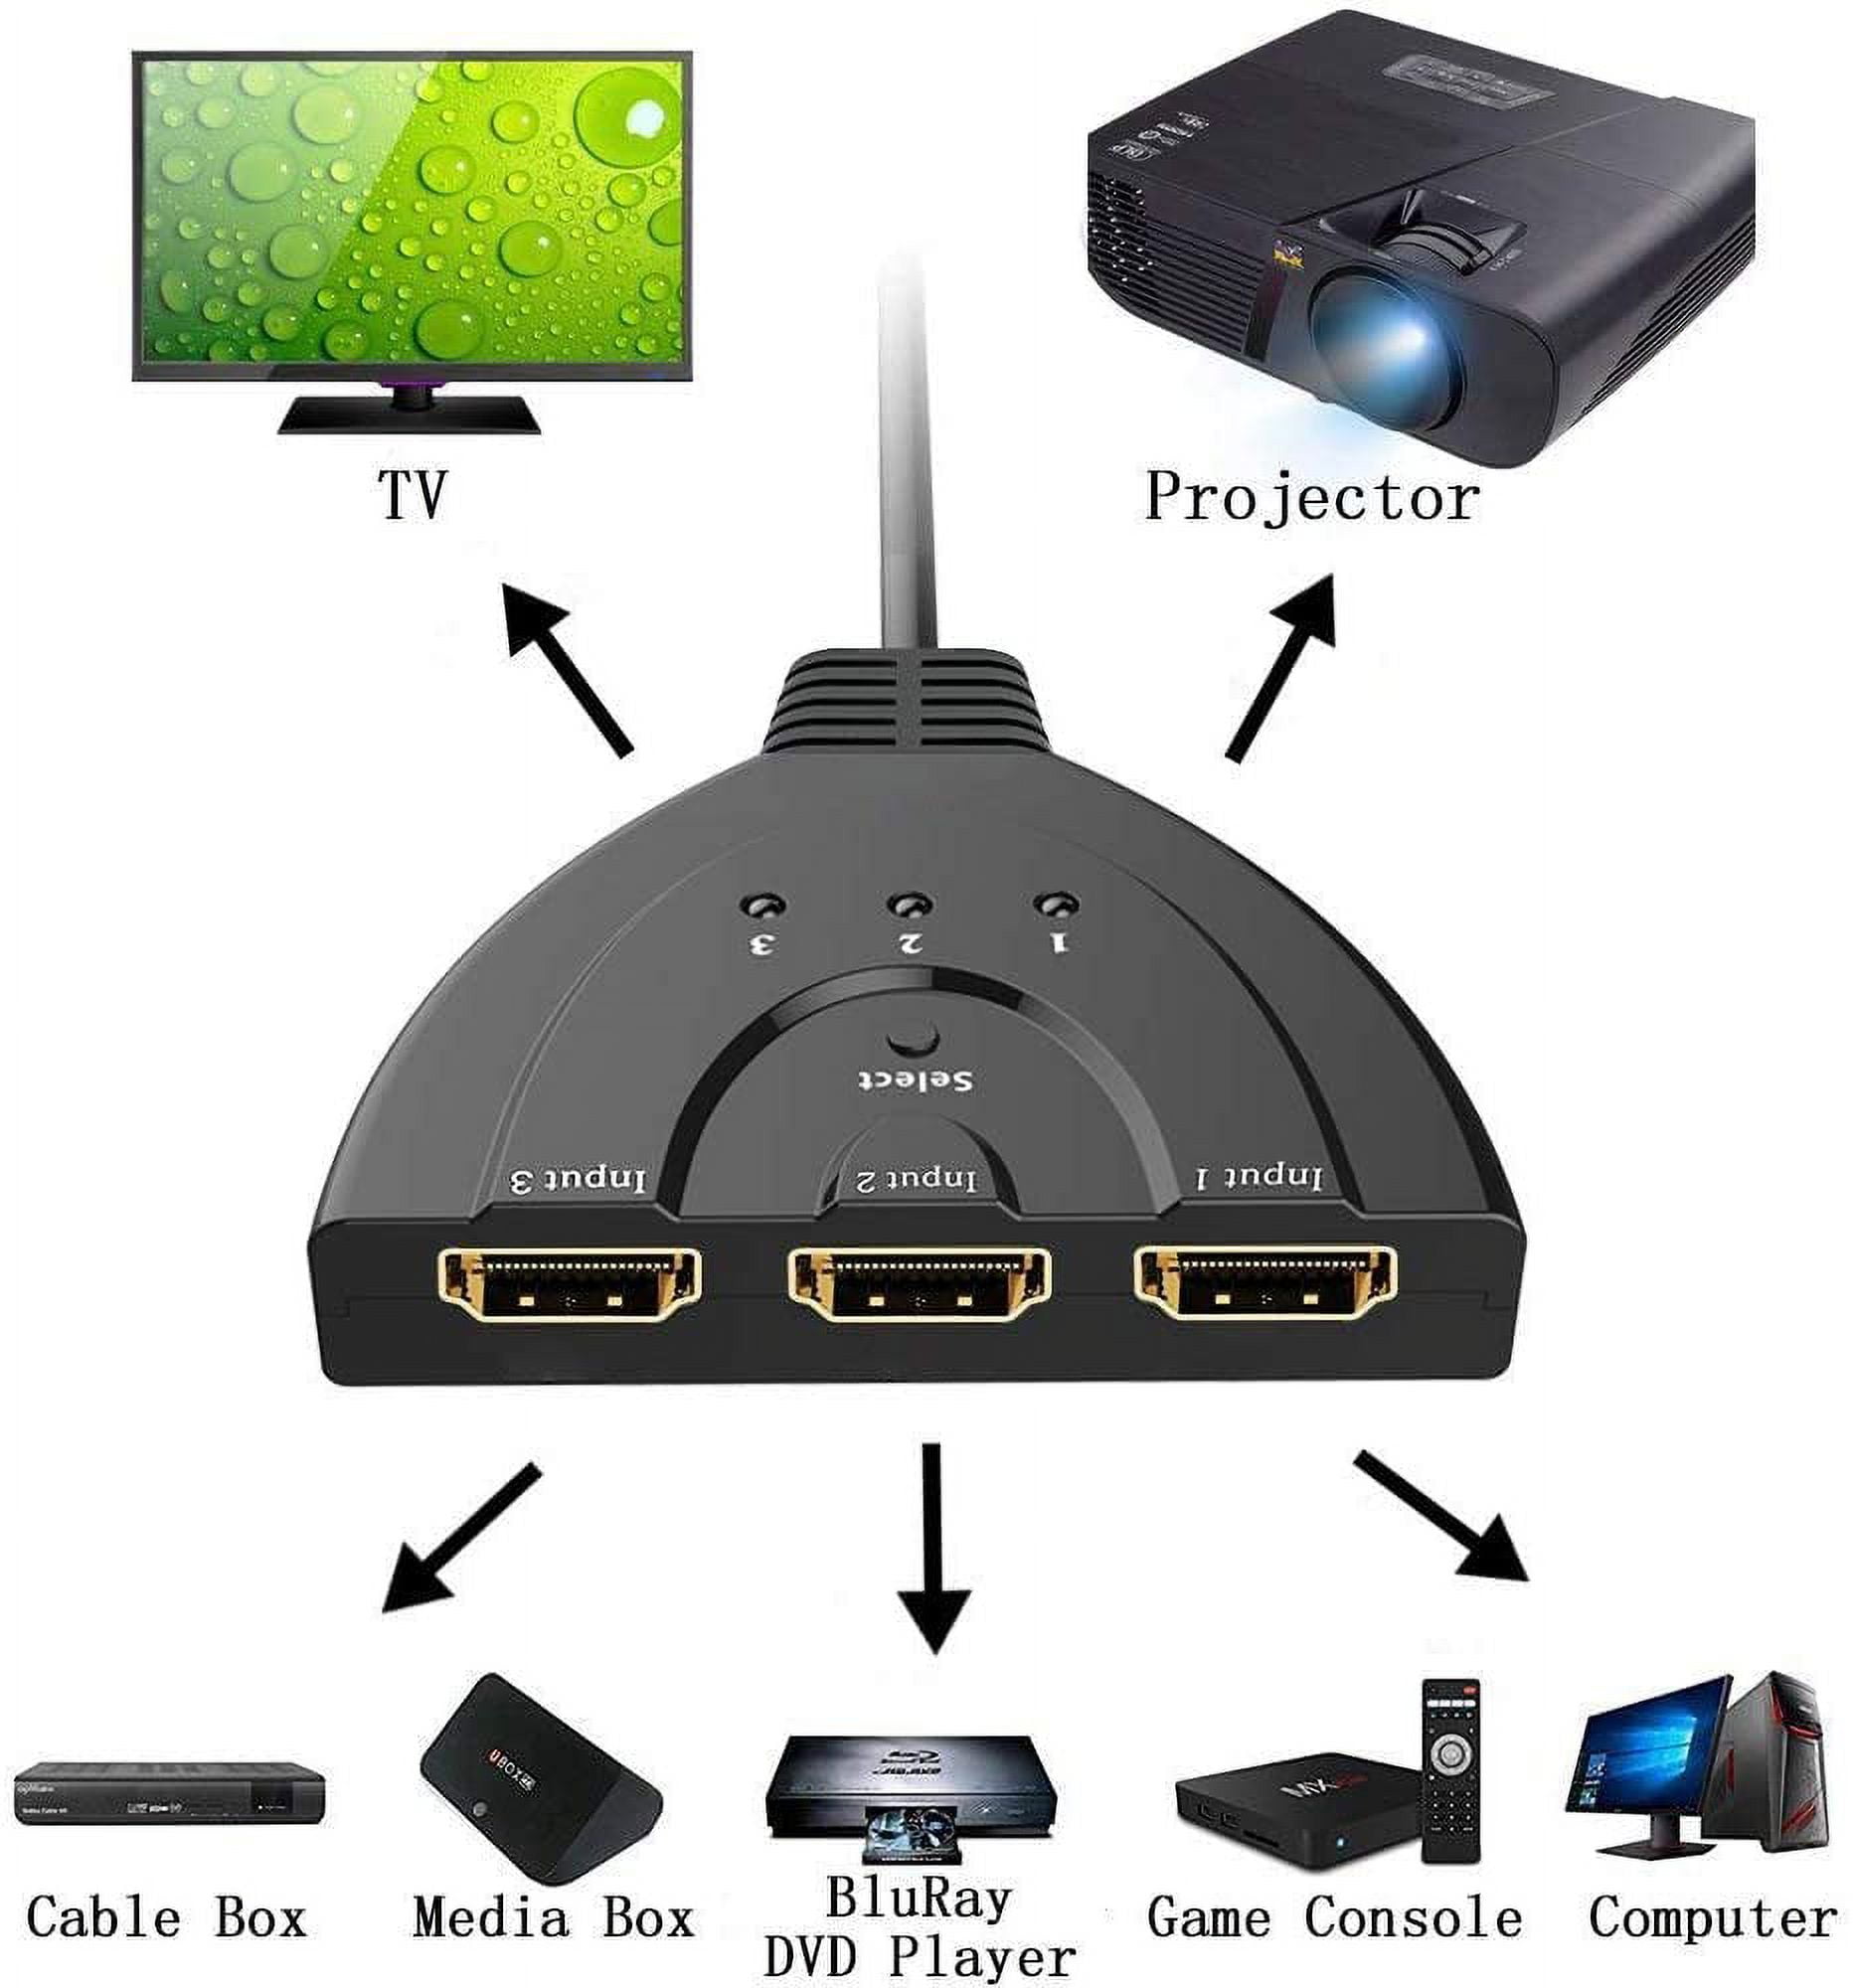 PKPOWER 3-Port HDMI Splitter Switch Cable Cord 2ft 3 In 1 out Auto High  Speed Switcher Splitter Support 3D,1080P For HDMI TV, PS3, Xbox One,etc 